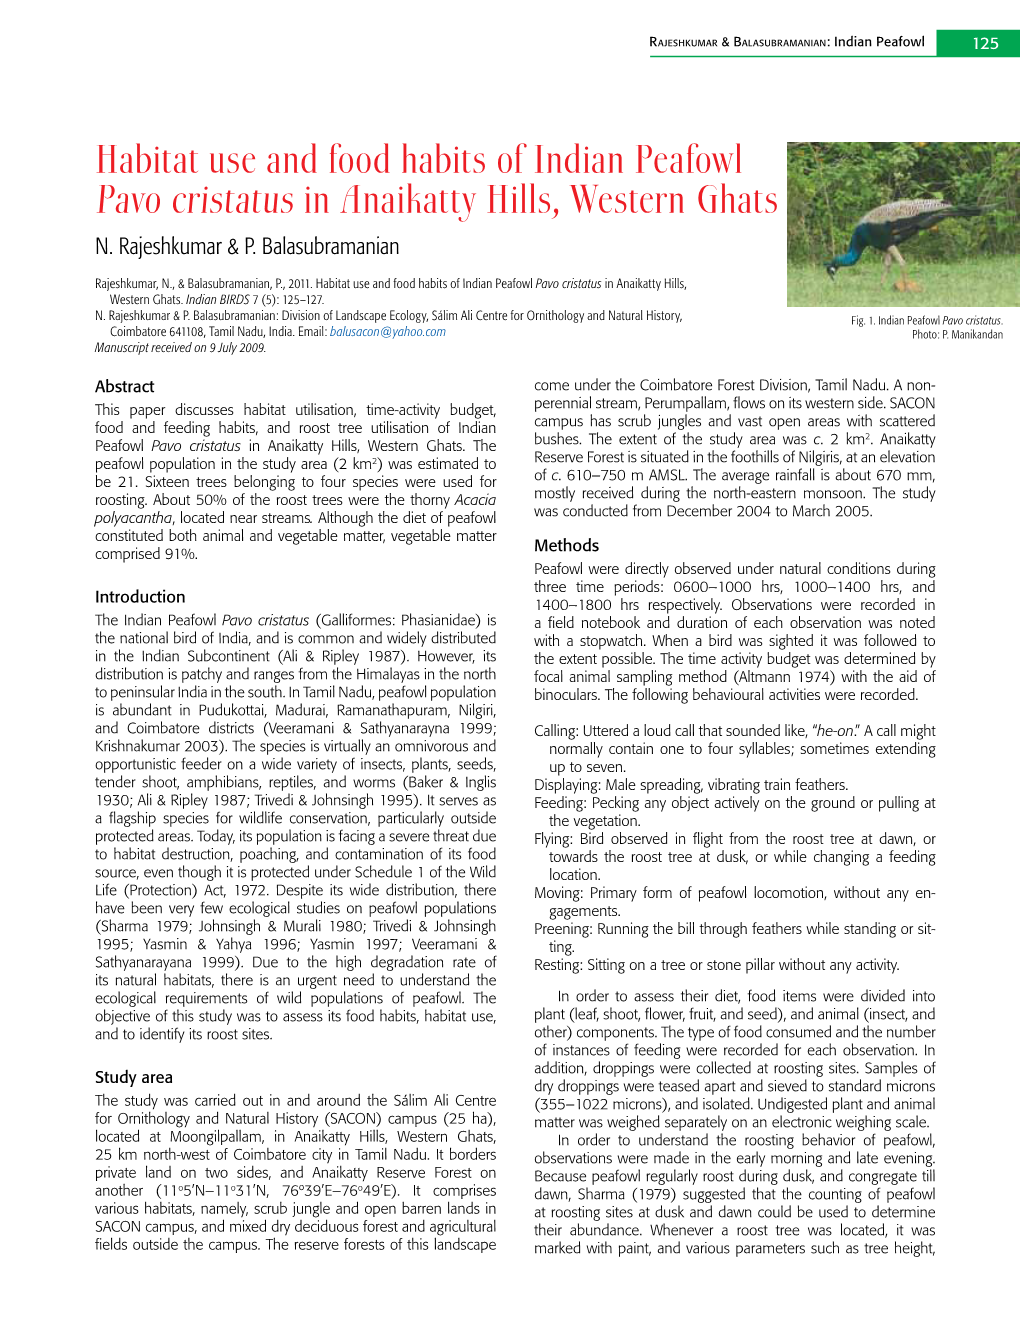 Habitat Use and Food Habits of Indian Peafowl Pavo Cristatus in Anaikatty Hills, Western Ghats N